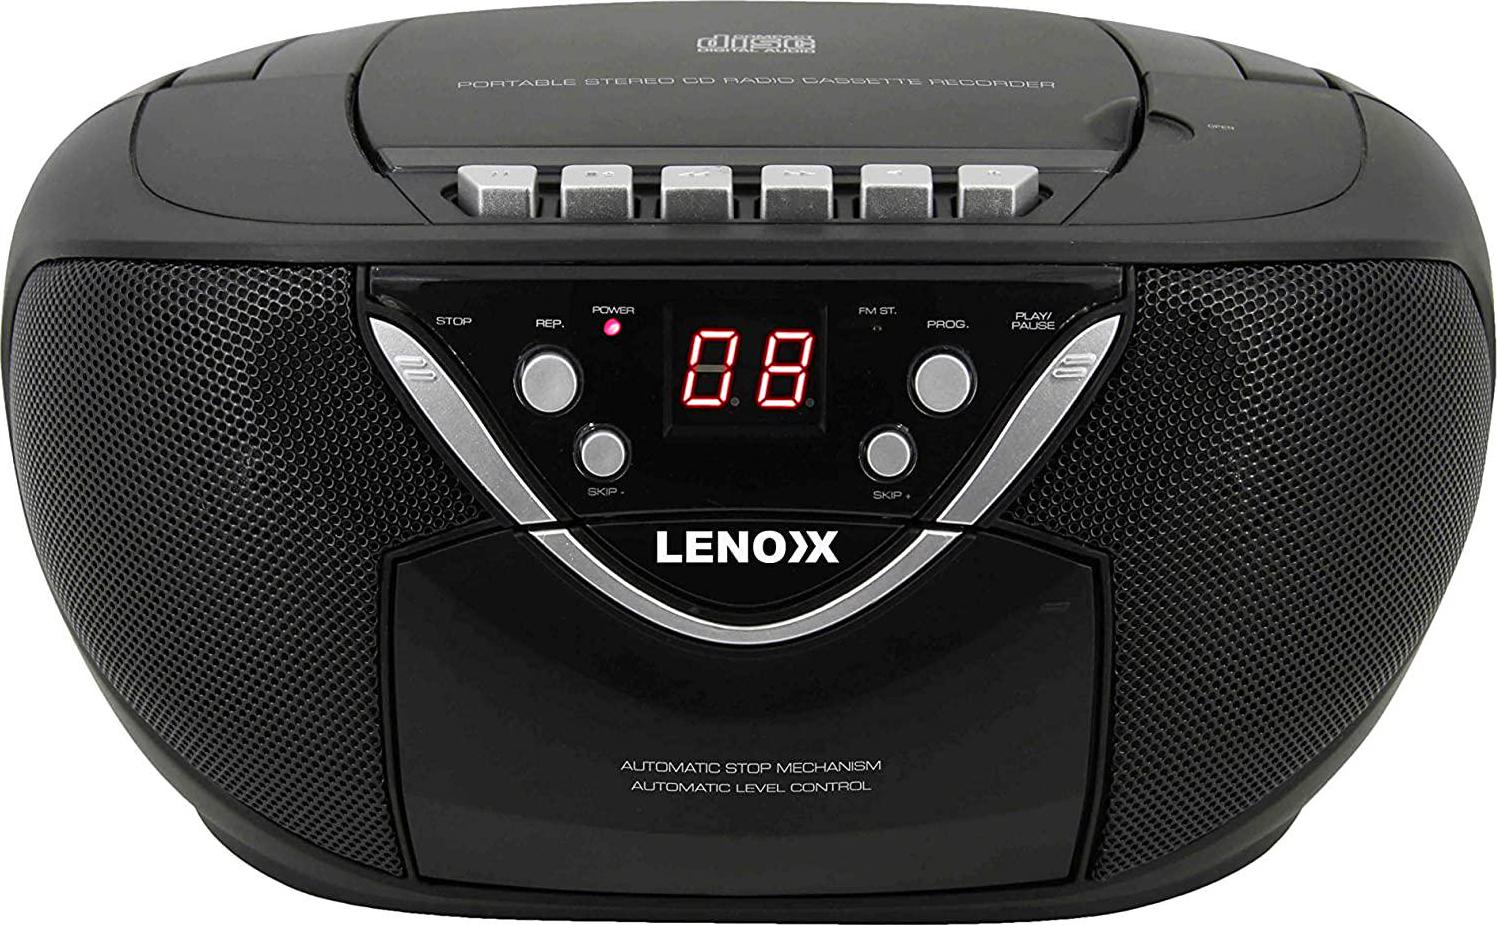 Lenoxx, Lenoxx Cd Player and Cassette Player | Led | 3.5mm Aux | Fm Radio with Antenna | 10-Watt Speakers | Portable and Travel-Friendly | Battery OperatedÂ